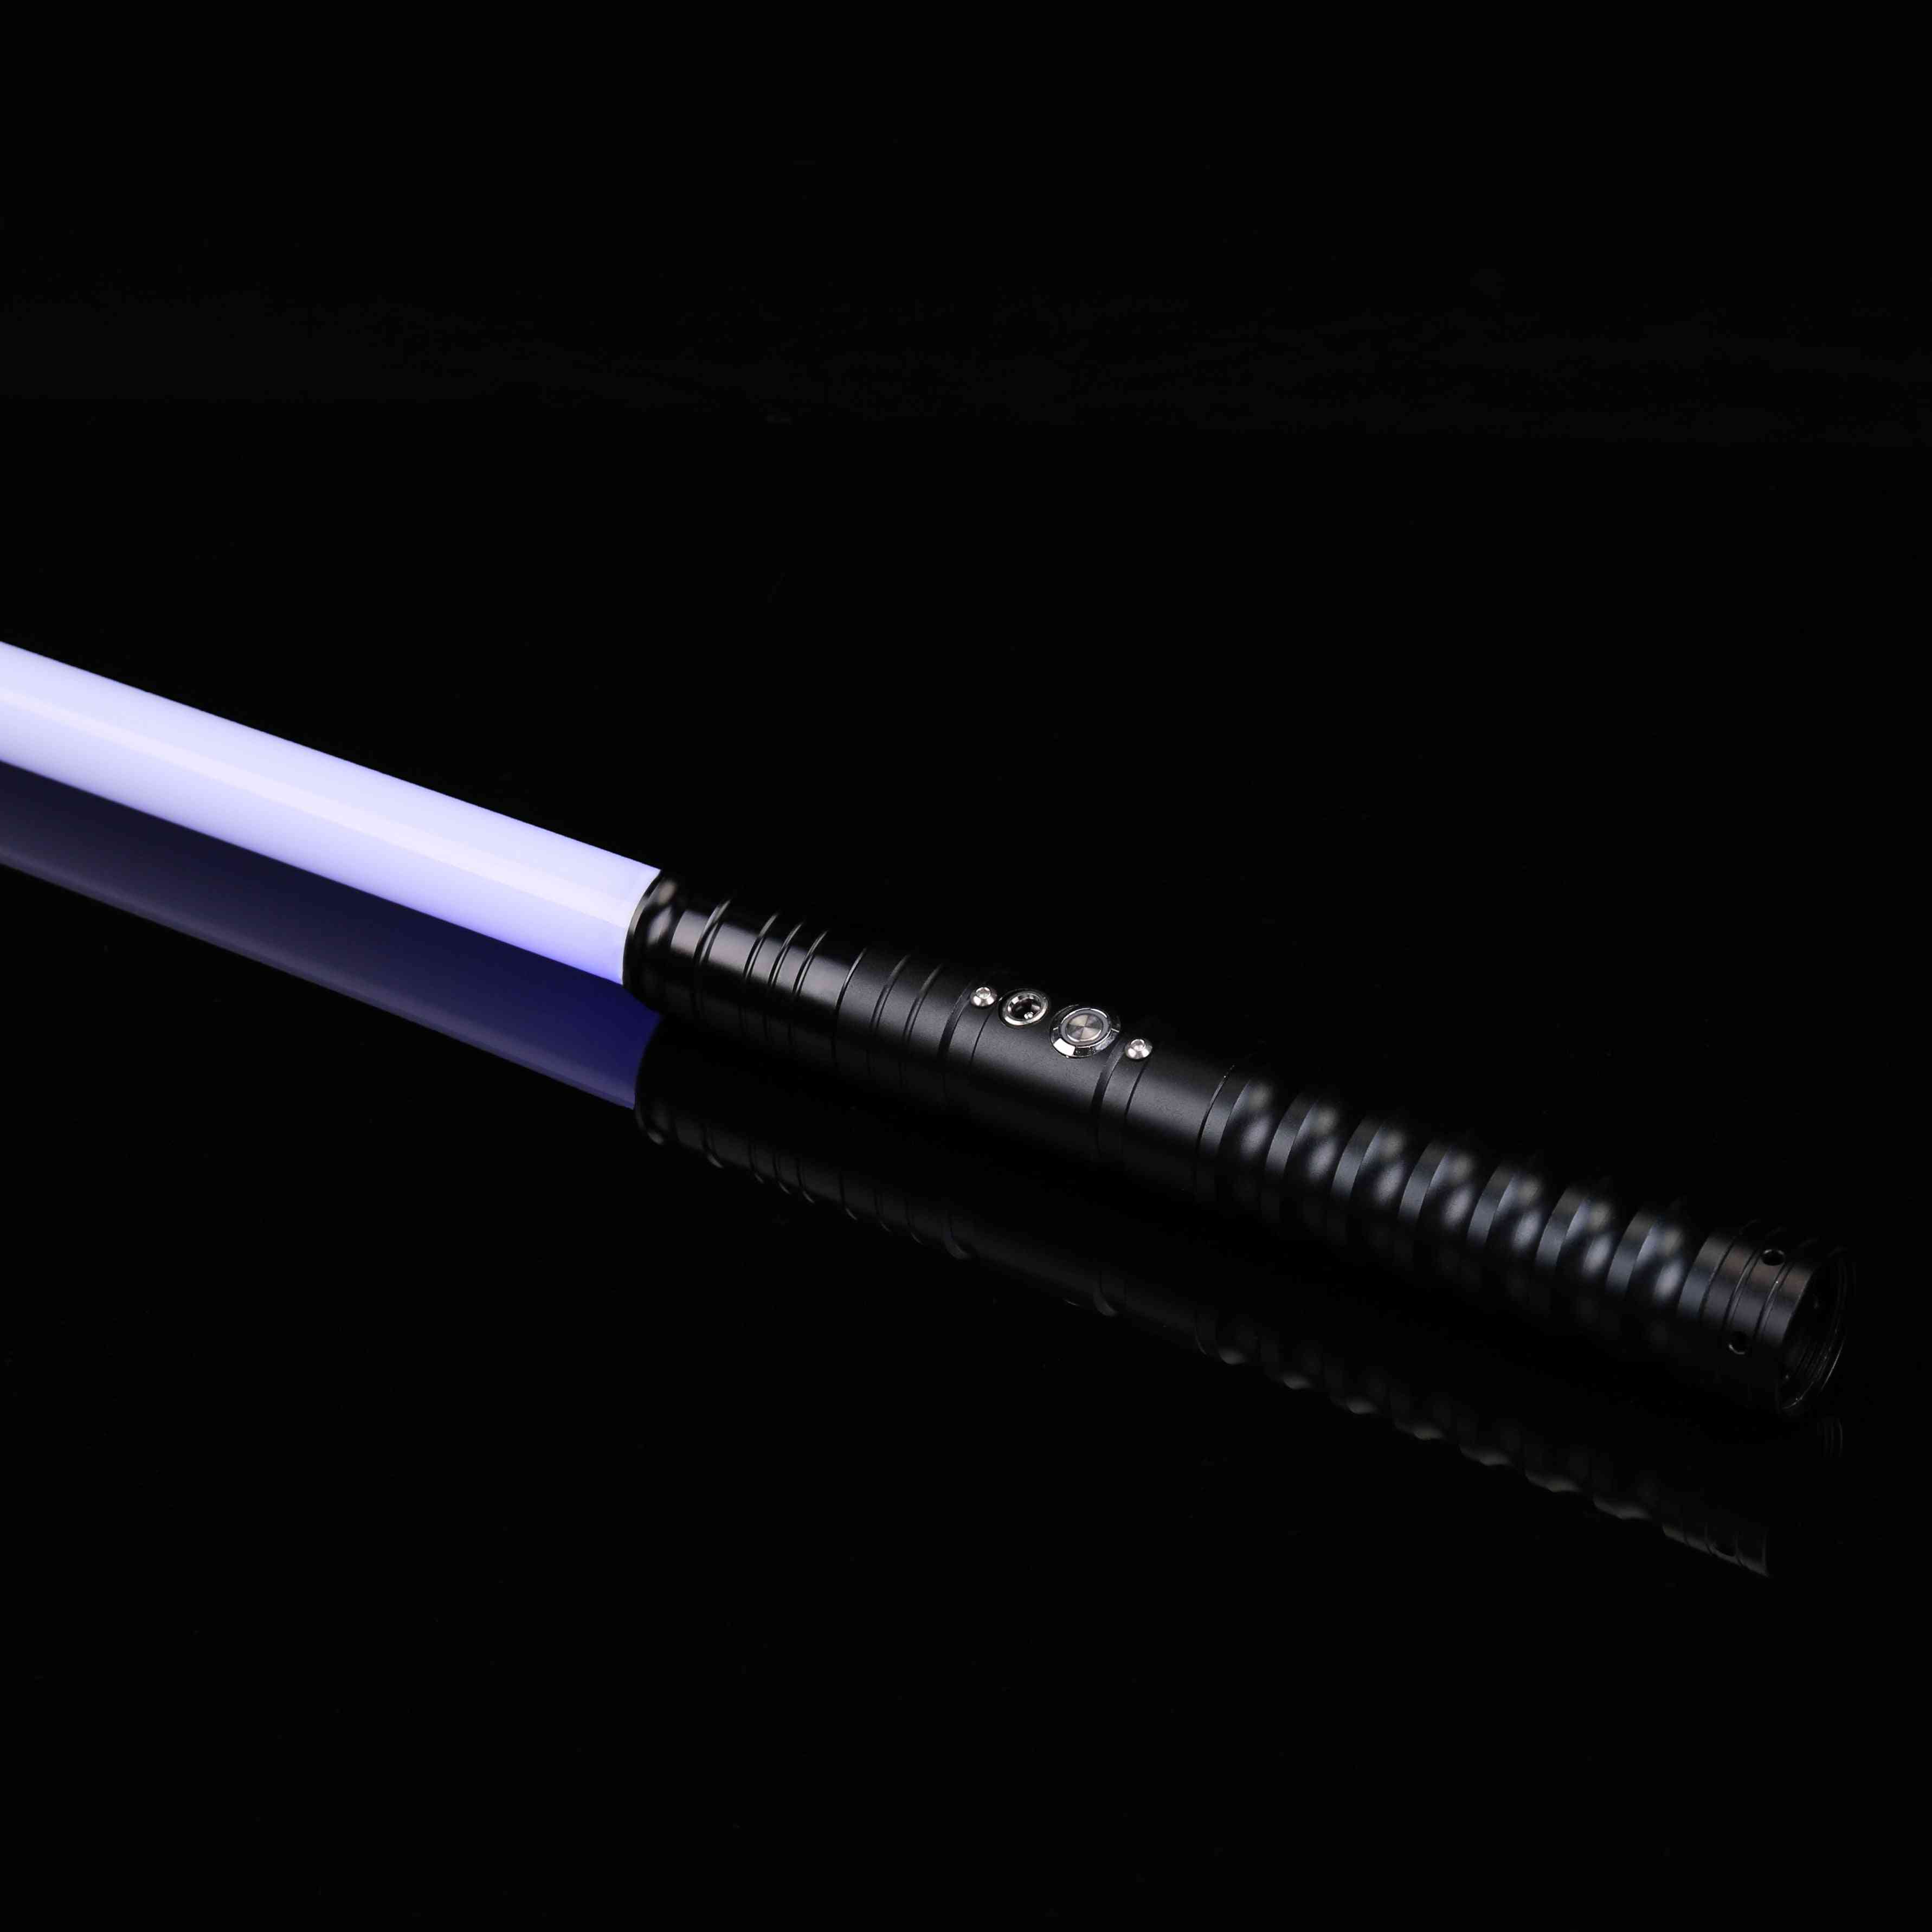 Eco Rgb Light, Saber Dueling With Blade Metal Handle, Foc Lock-up, Cosplay Toy